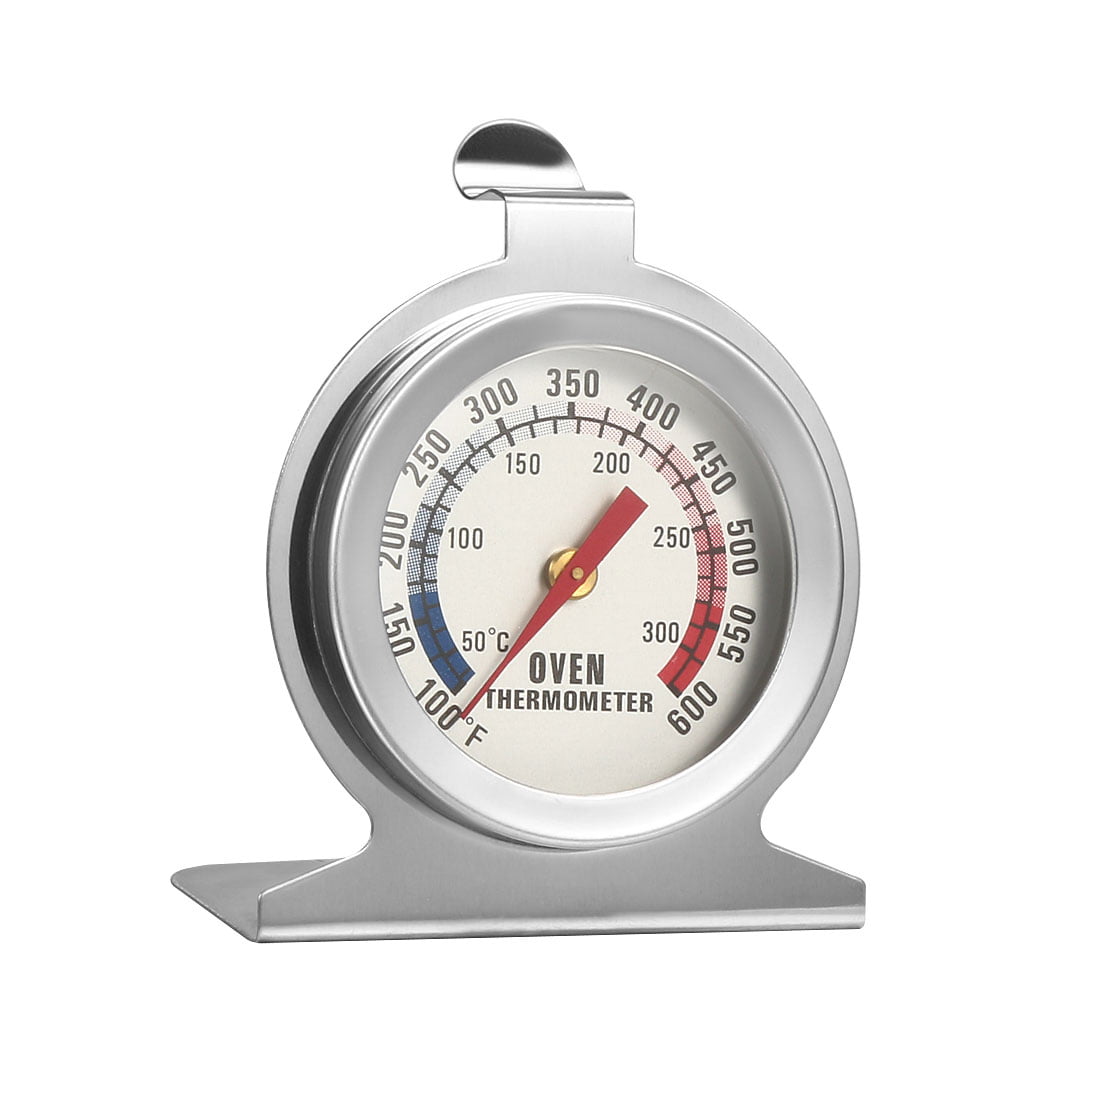 Oven Thermometer 100 to 600 F & 50 to 300 C Taylor Home 3506 Oven Safe 